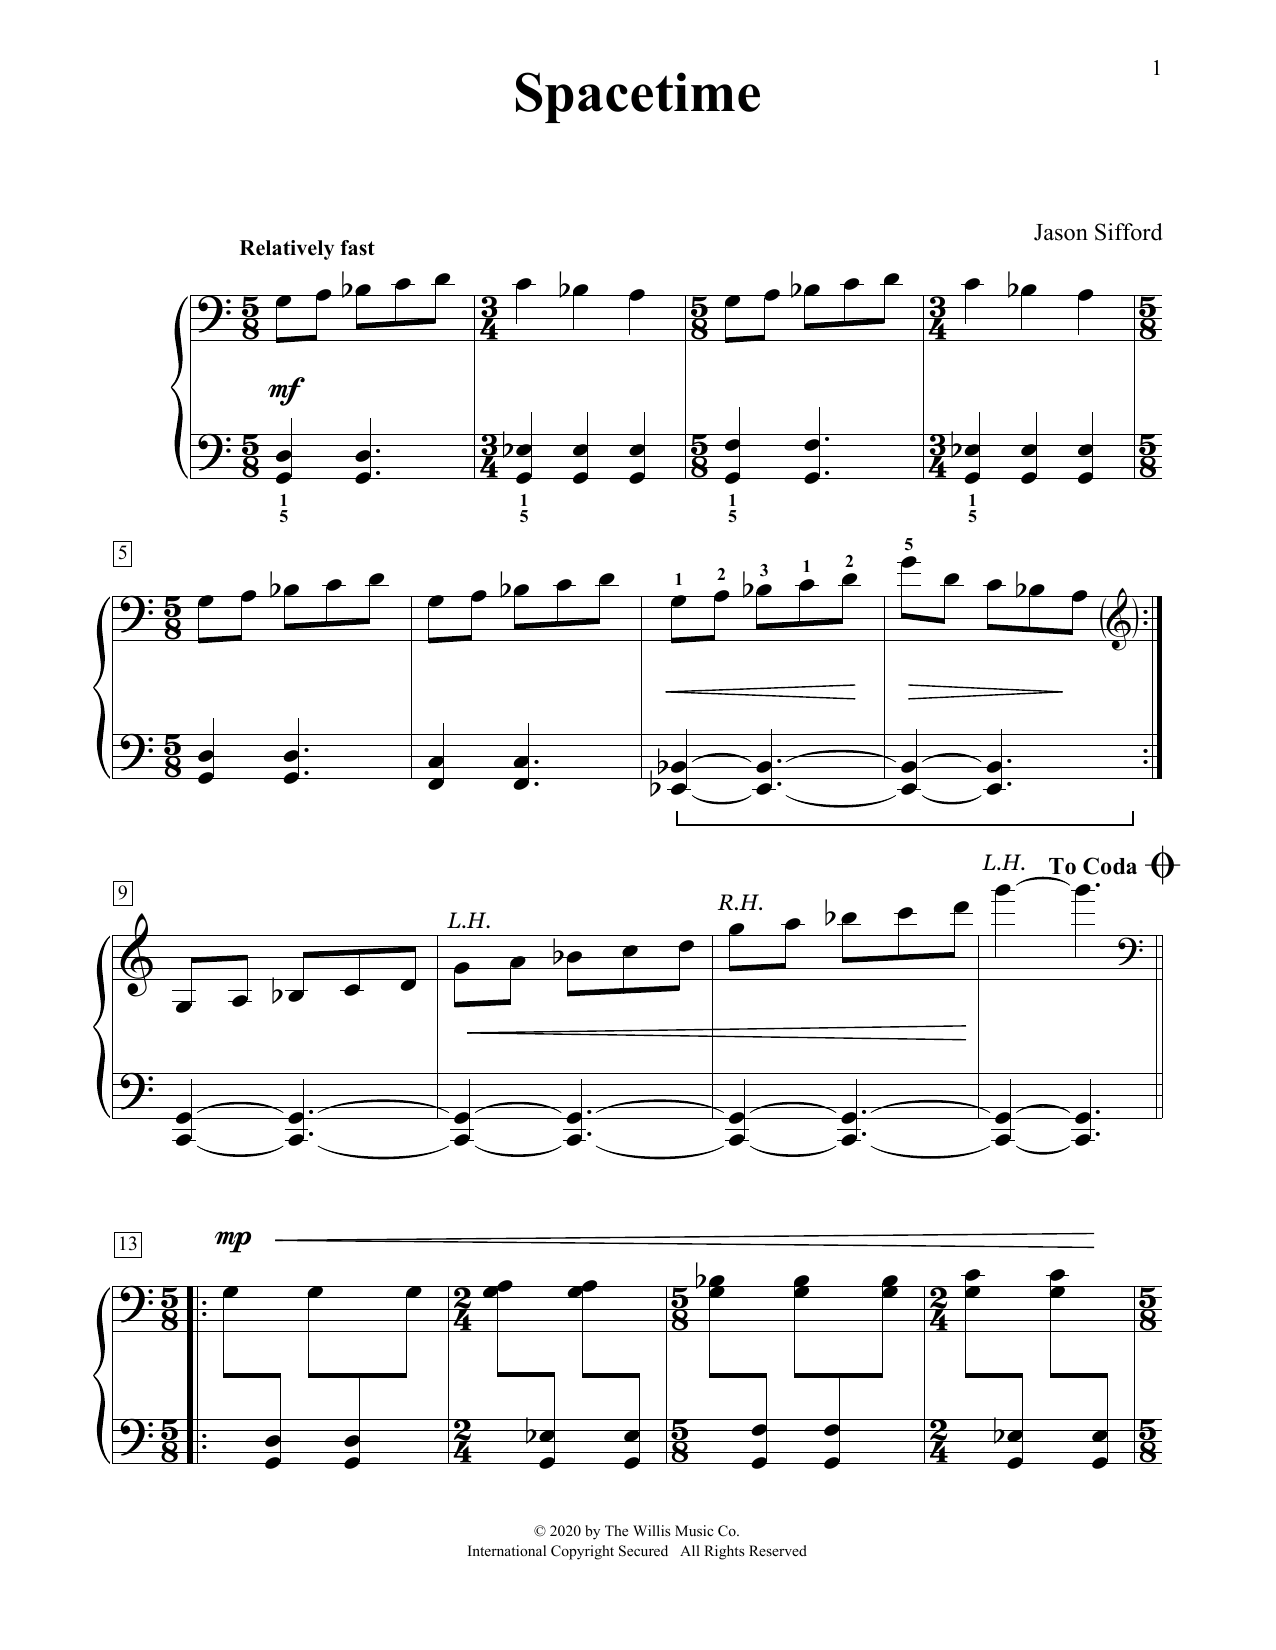 Download Jason Sifford Spacetime Sheet Music